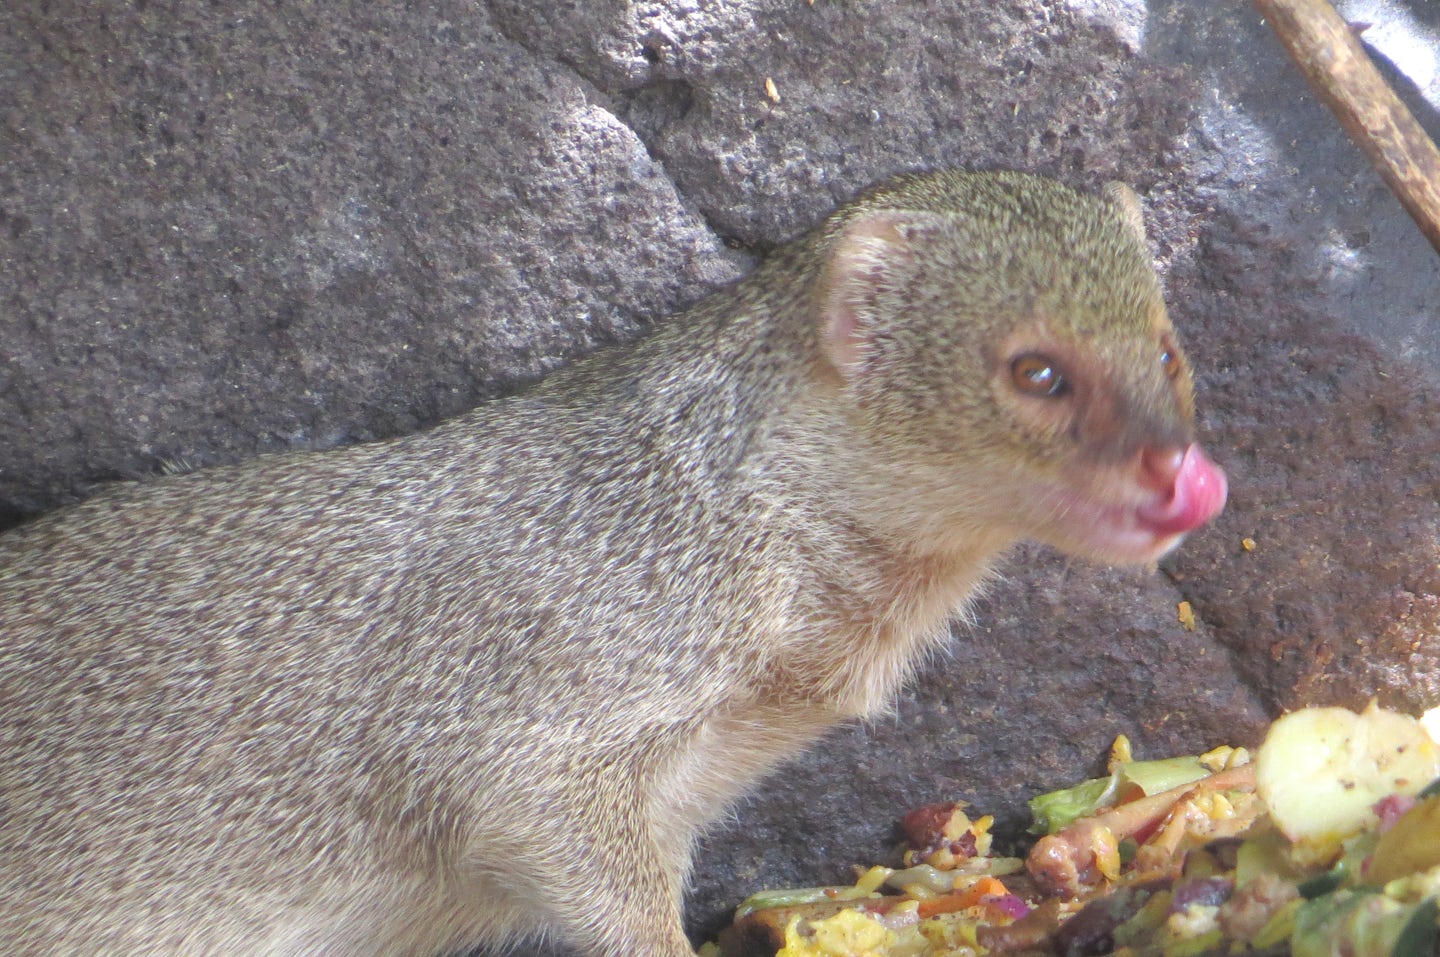 By the Ship Wreck Bar on South Friars Beach, St Kitts.. The restaurant feeds the Mongoose scraps of veggies and fruit.They sure are fun to watch!